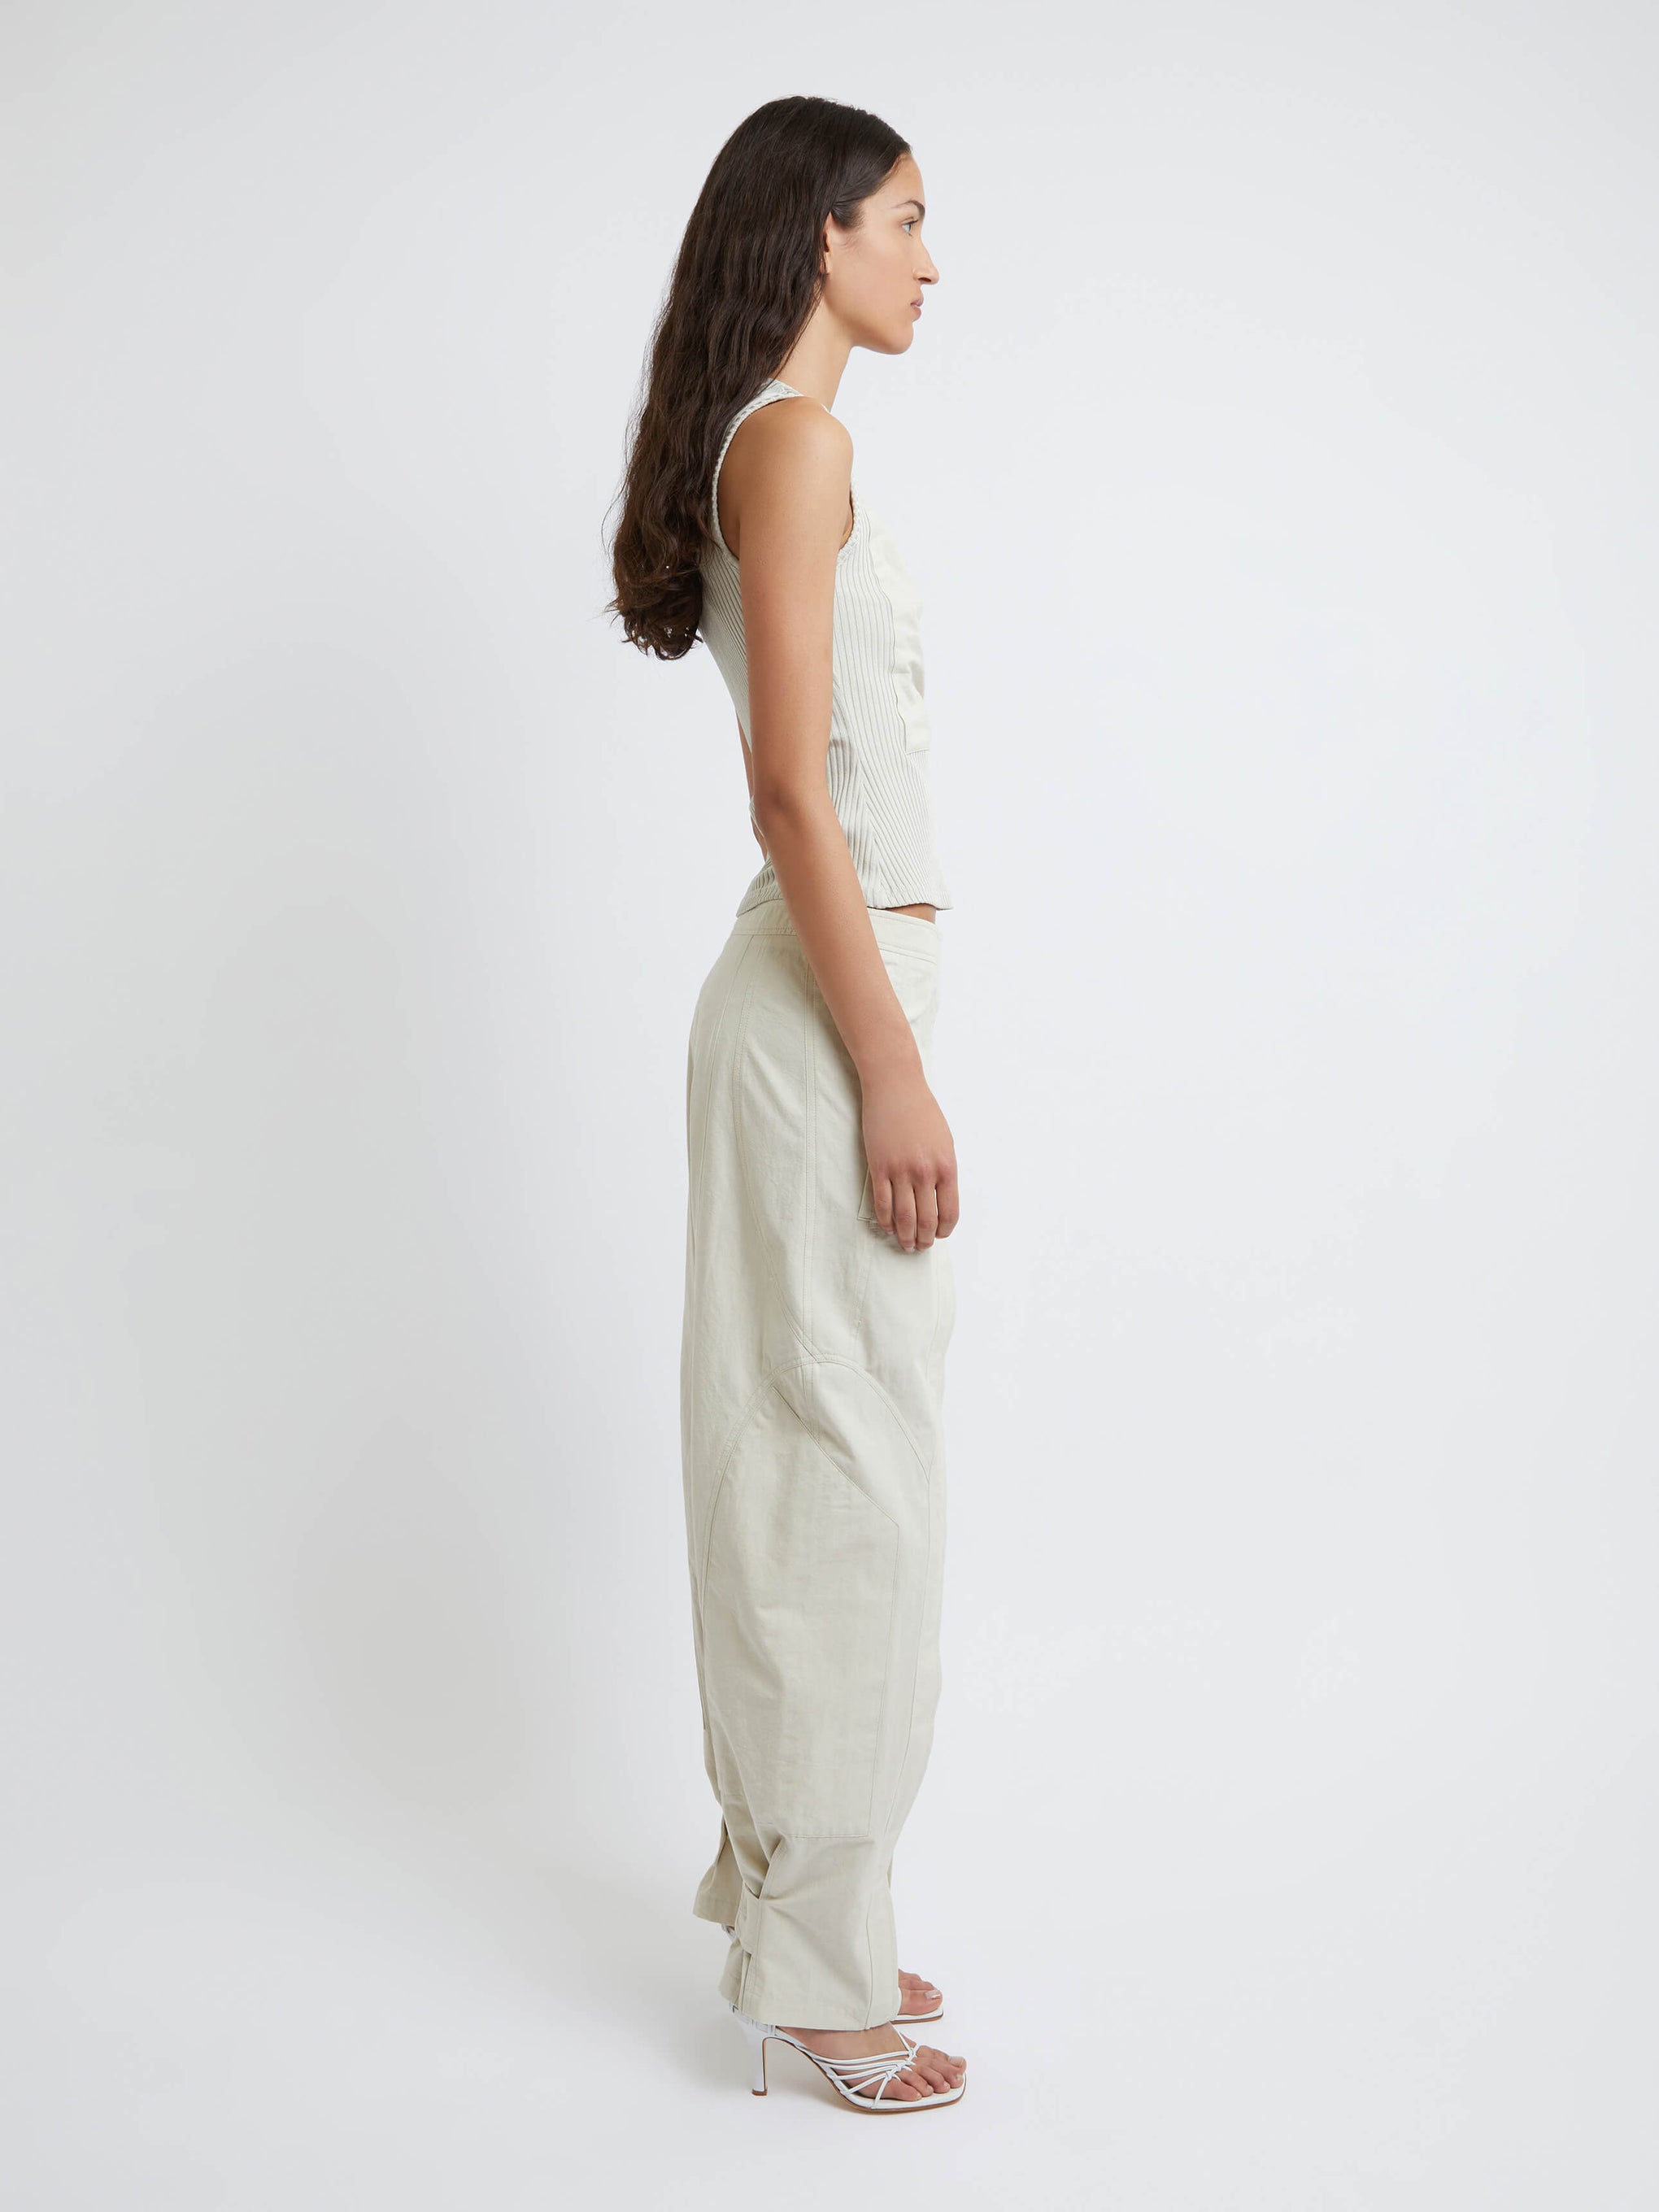 Christopher Esber Cocosolo Trouser in Putty available at TNT The New Trend Australia.